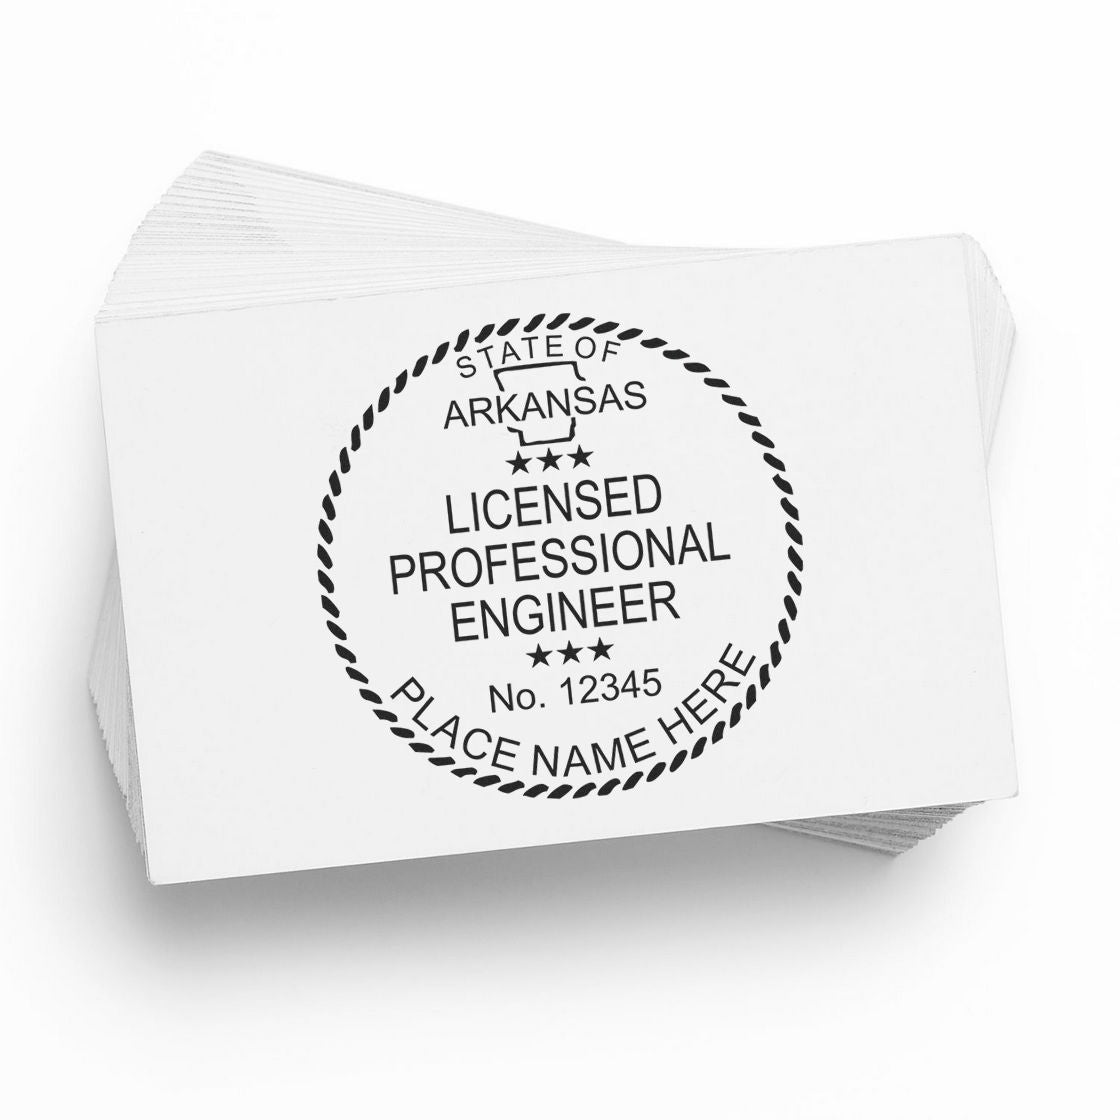 A lifestyle photo showing a stamped image of the Digital Arkansas PE Stamp and Electronic Seal for Arkansas Engineer on a piece of paper